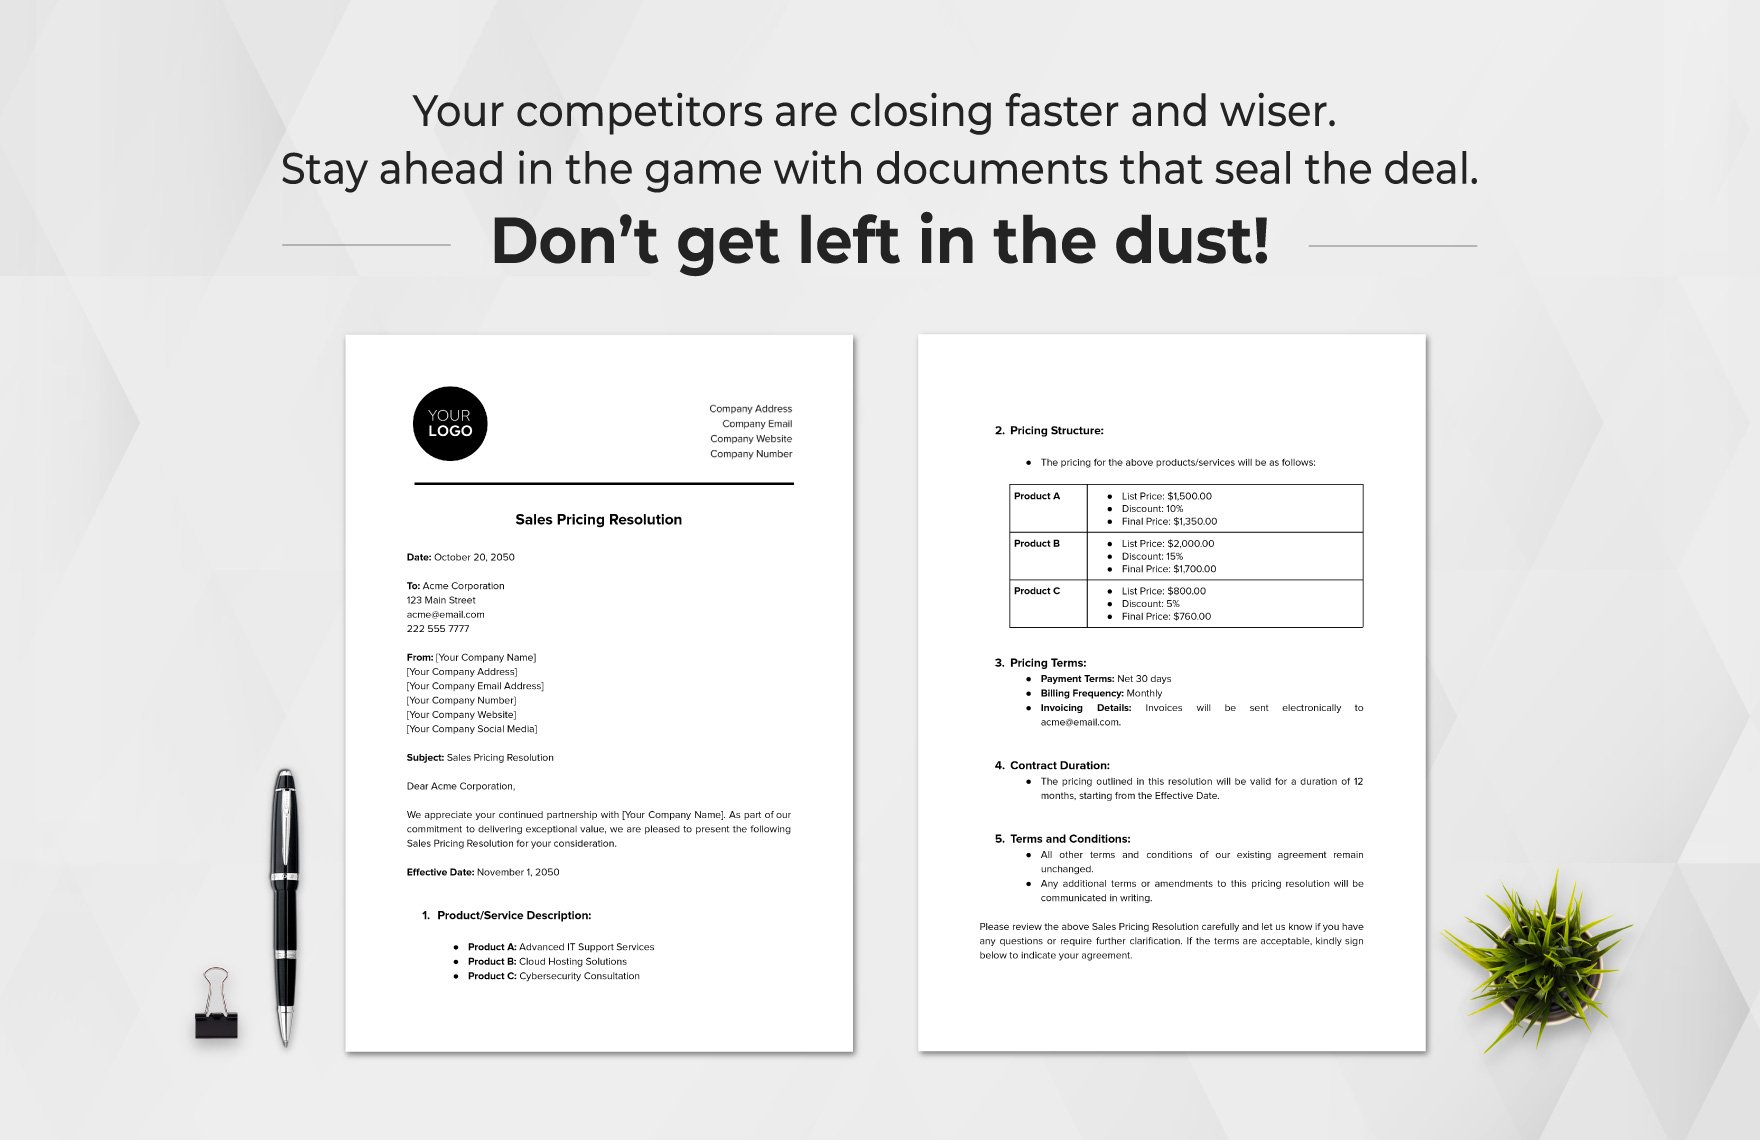 Sales Pricing Resolution Template